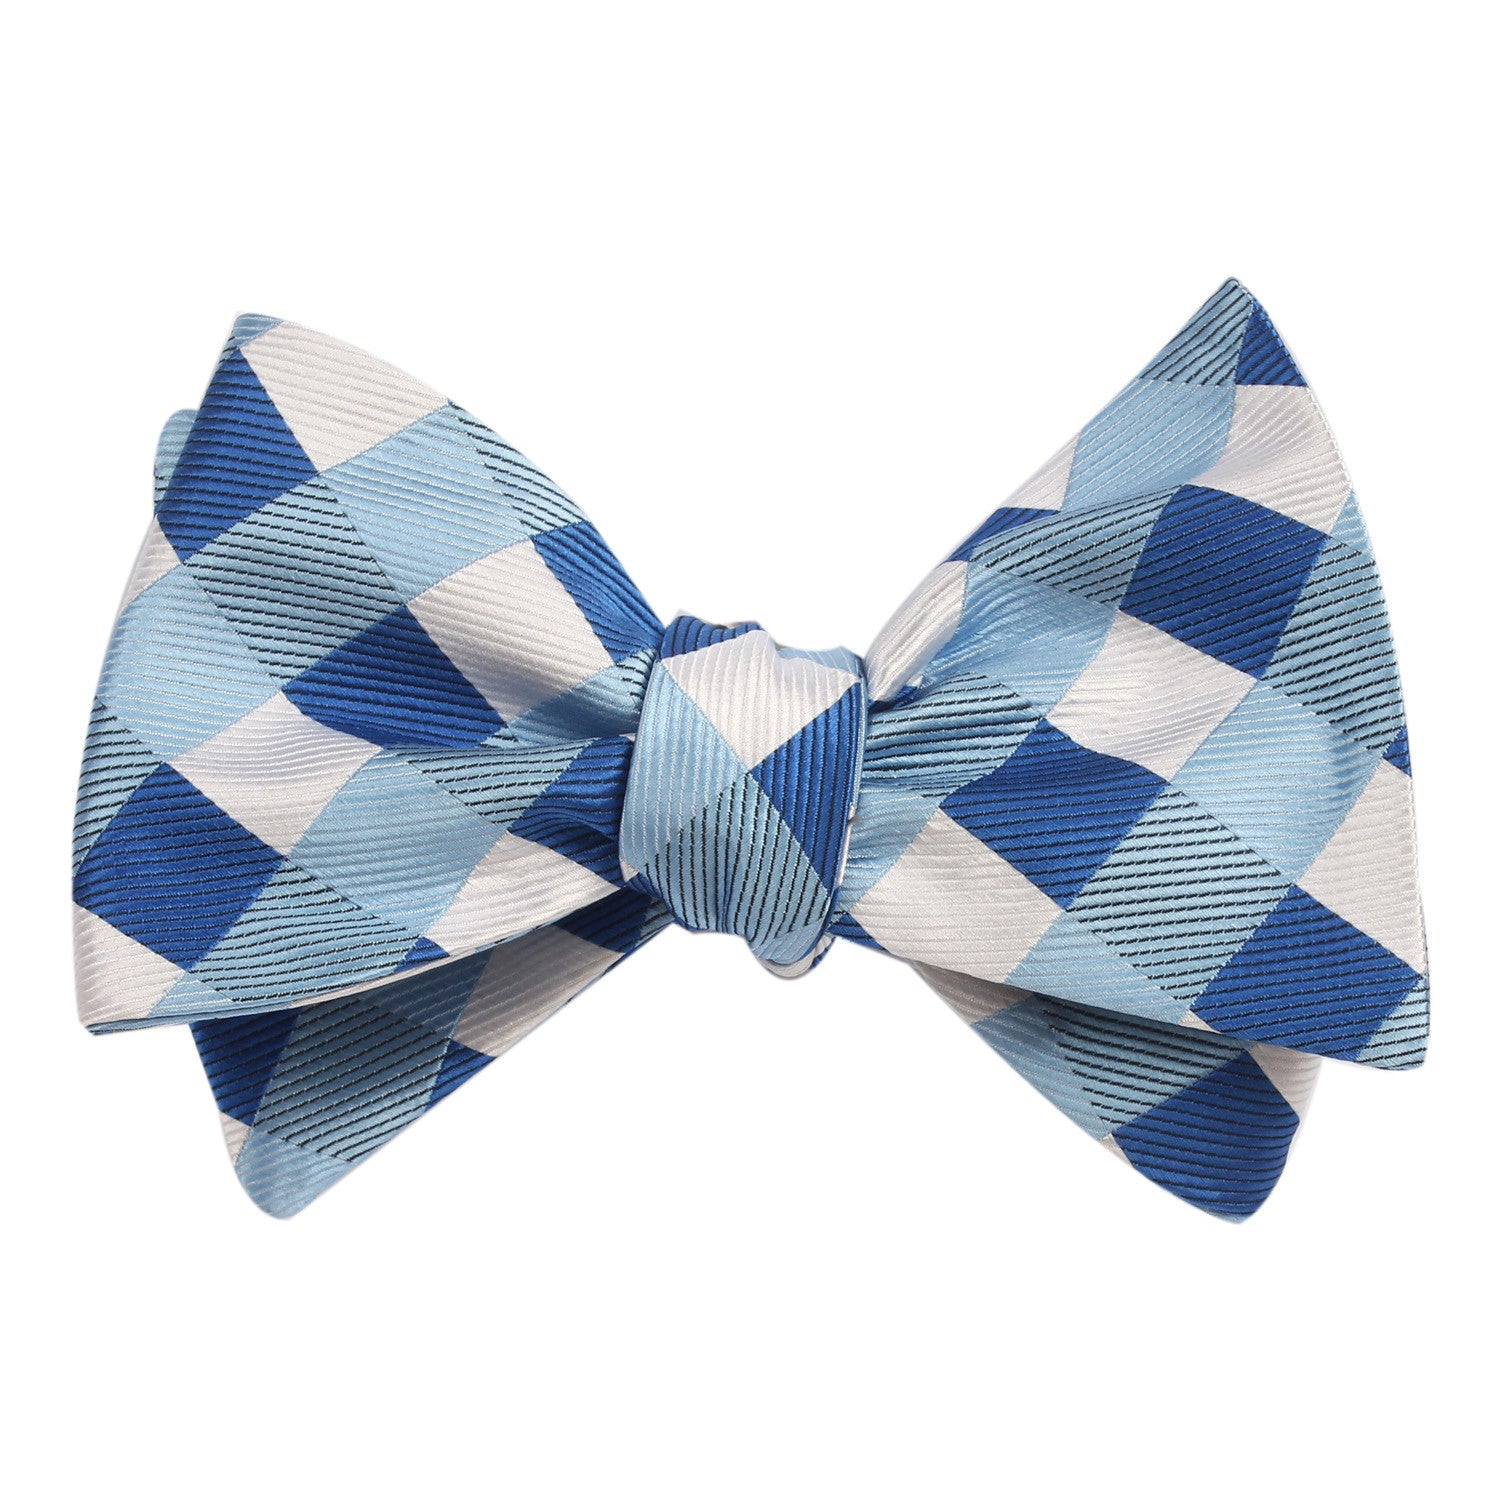 Sea and Light Blue White Checkered - Bow Tie (Untied) Self tied knot